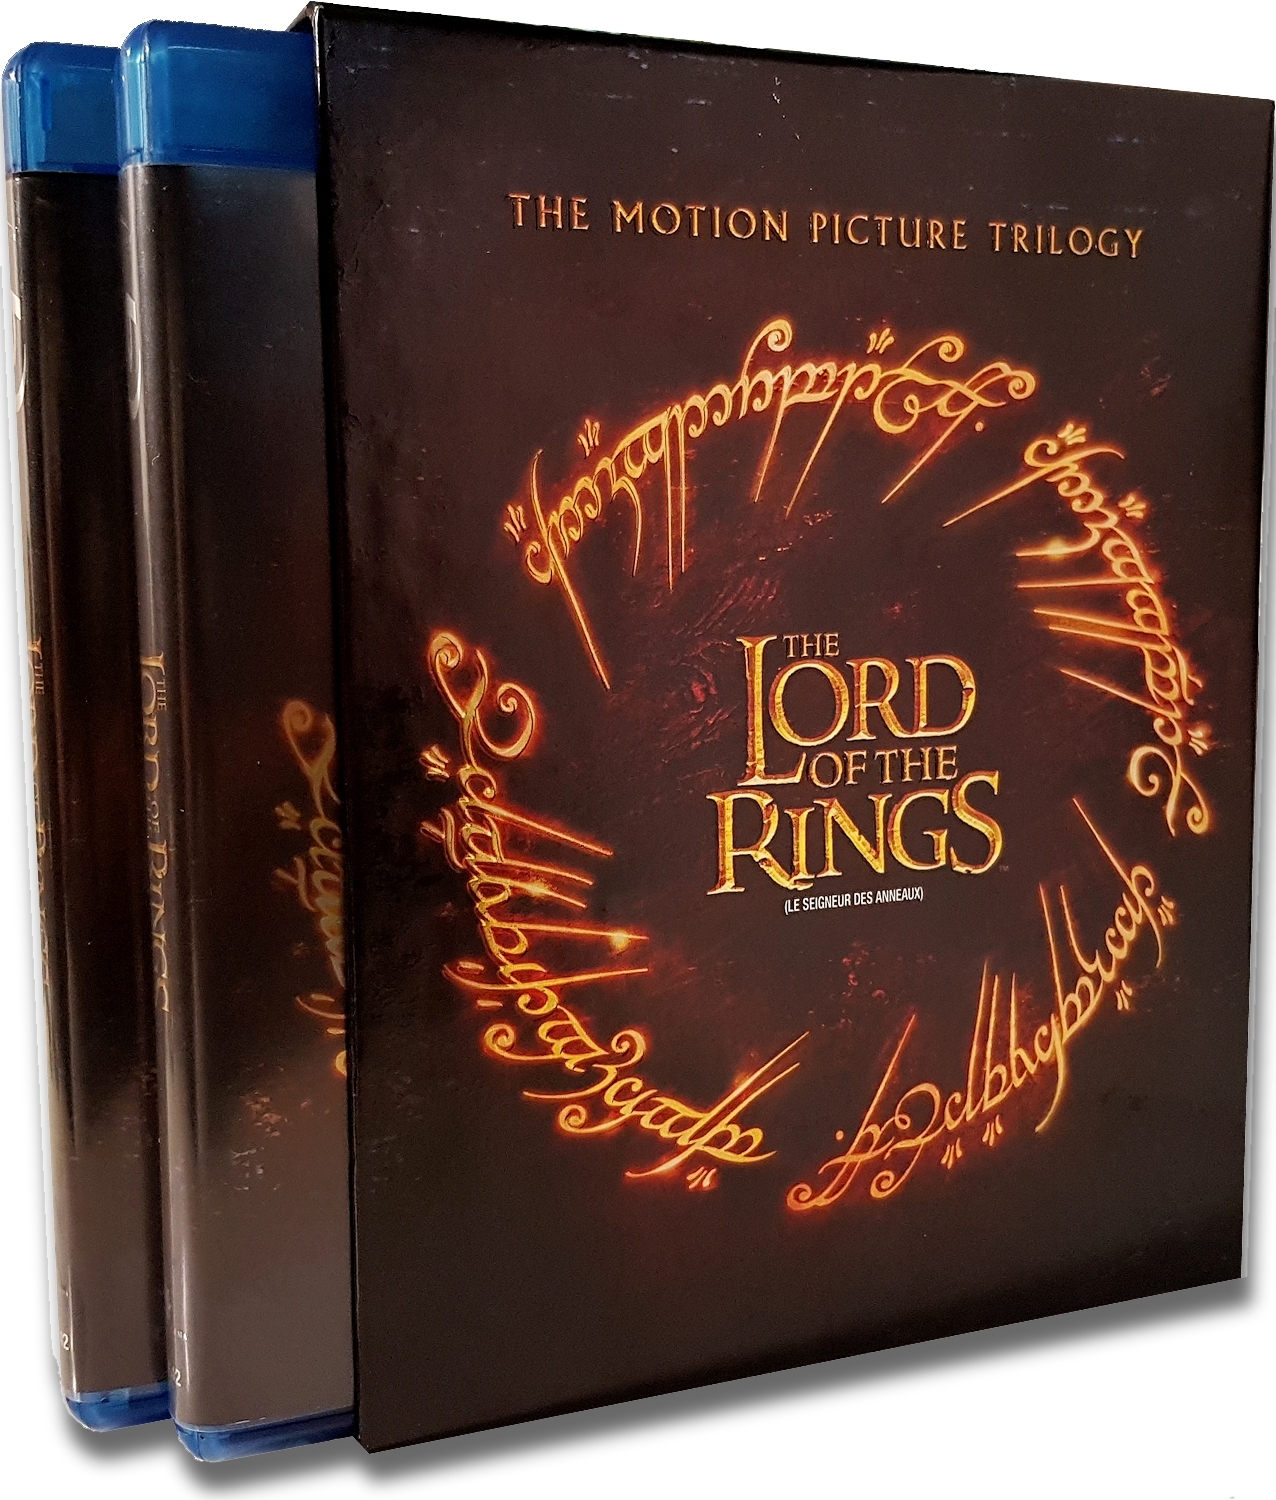 Primary image for Lord of the Rings: Motion Picture Trilogy [Blu-ray] (Bilingual)